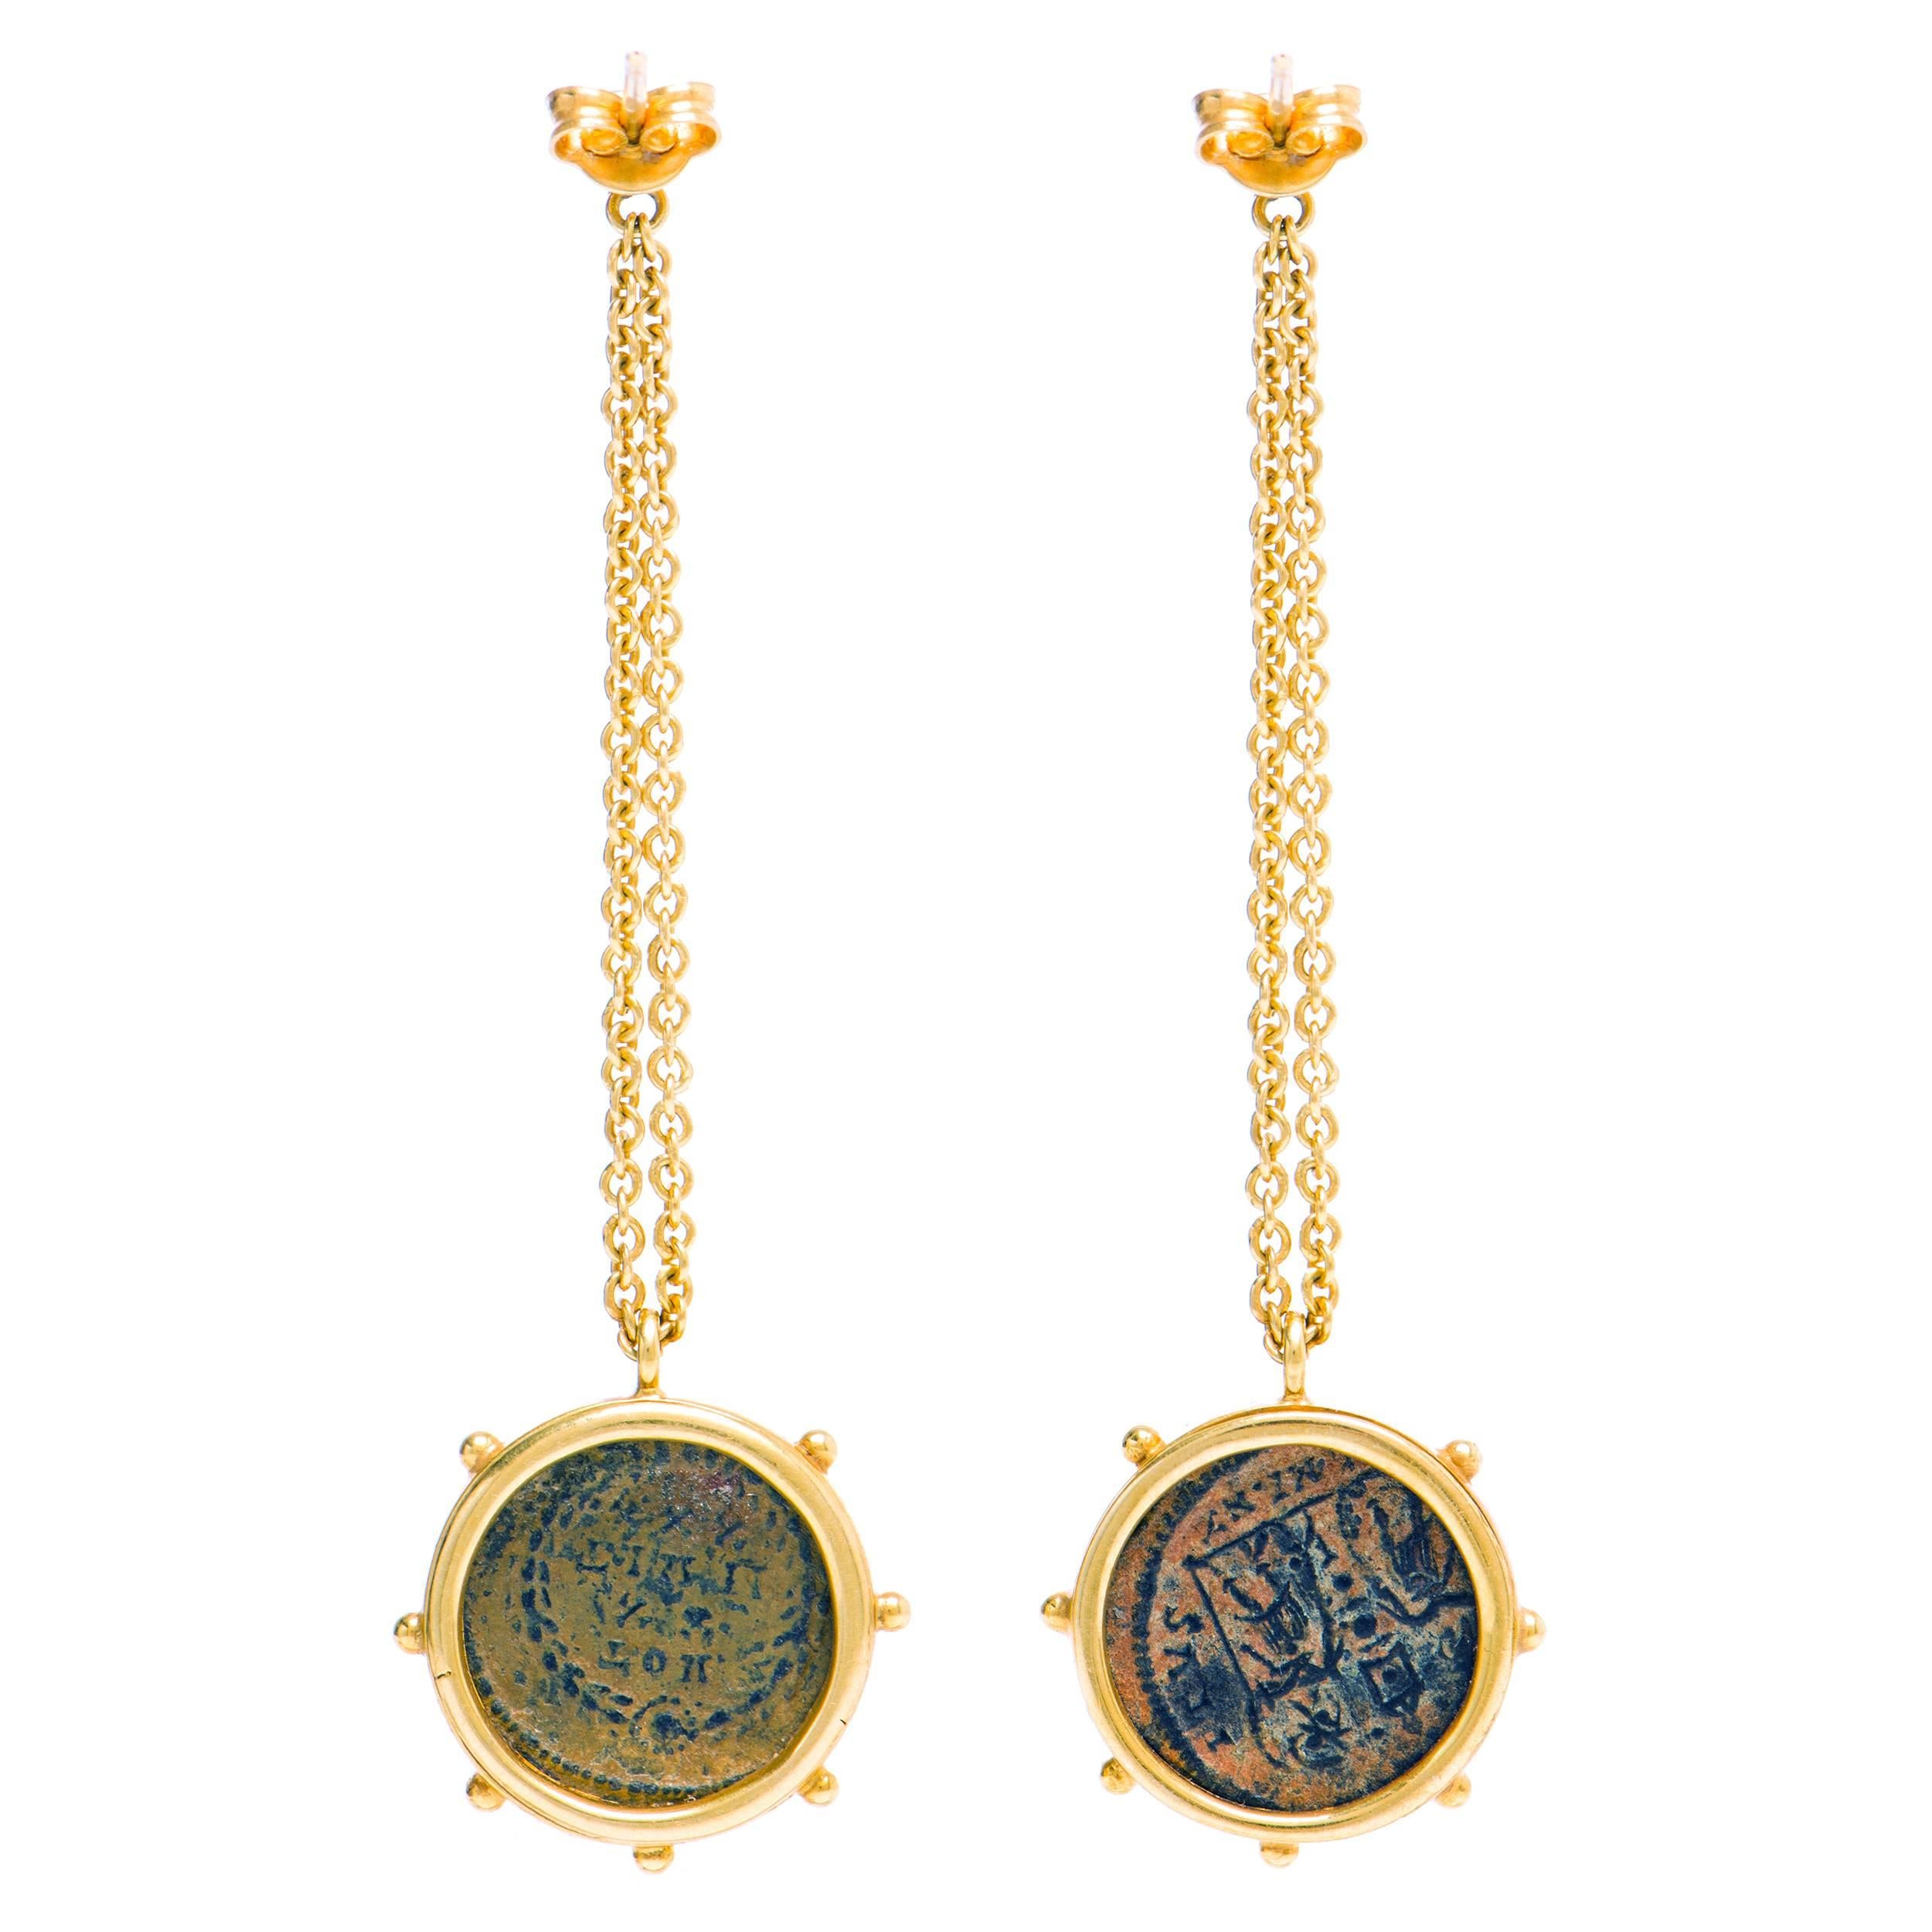 These DUBINI coin earrings from the 'Empires' collection feature authentic Roman bronze coins set in 18K yellow gold.

* Due to the unique process of hand carving coins in ancient times, there may be a few stylistic differences from the image shown.